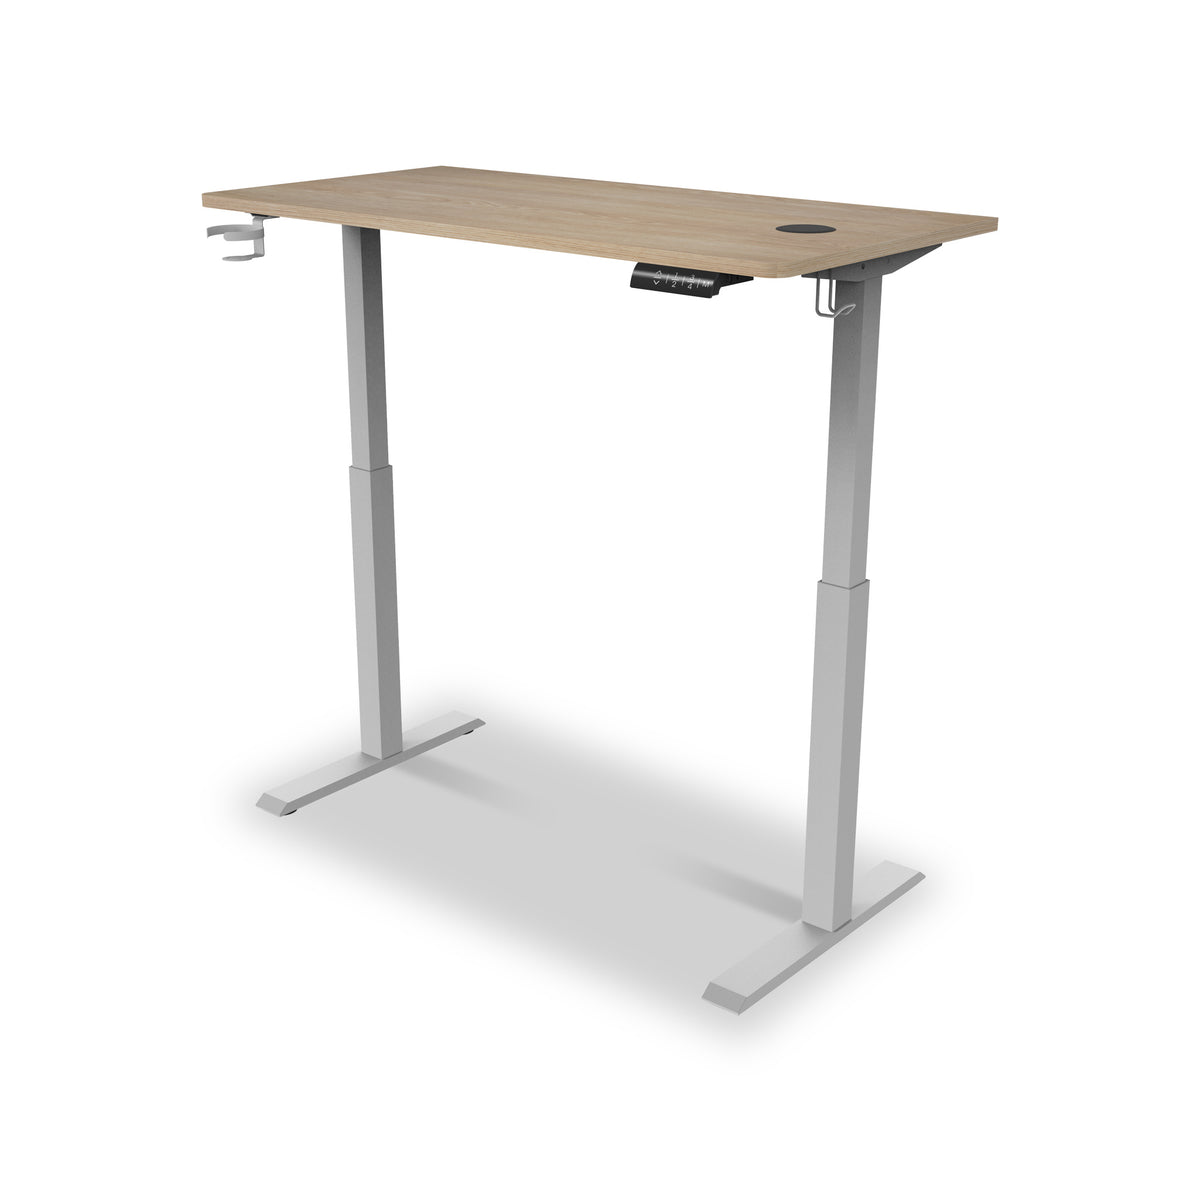 Koble Gino Ash Smart Electric Height Adjustable Standing Desk